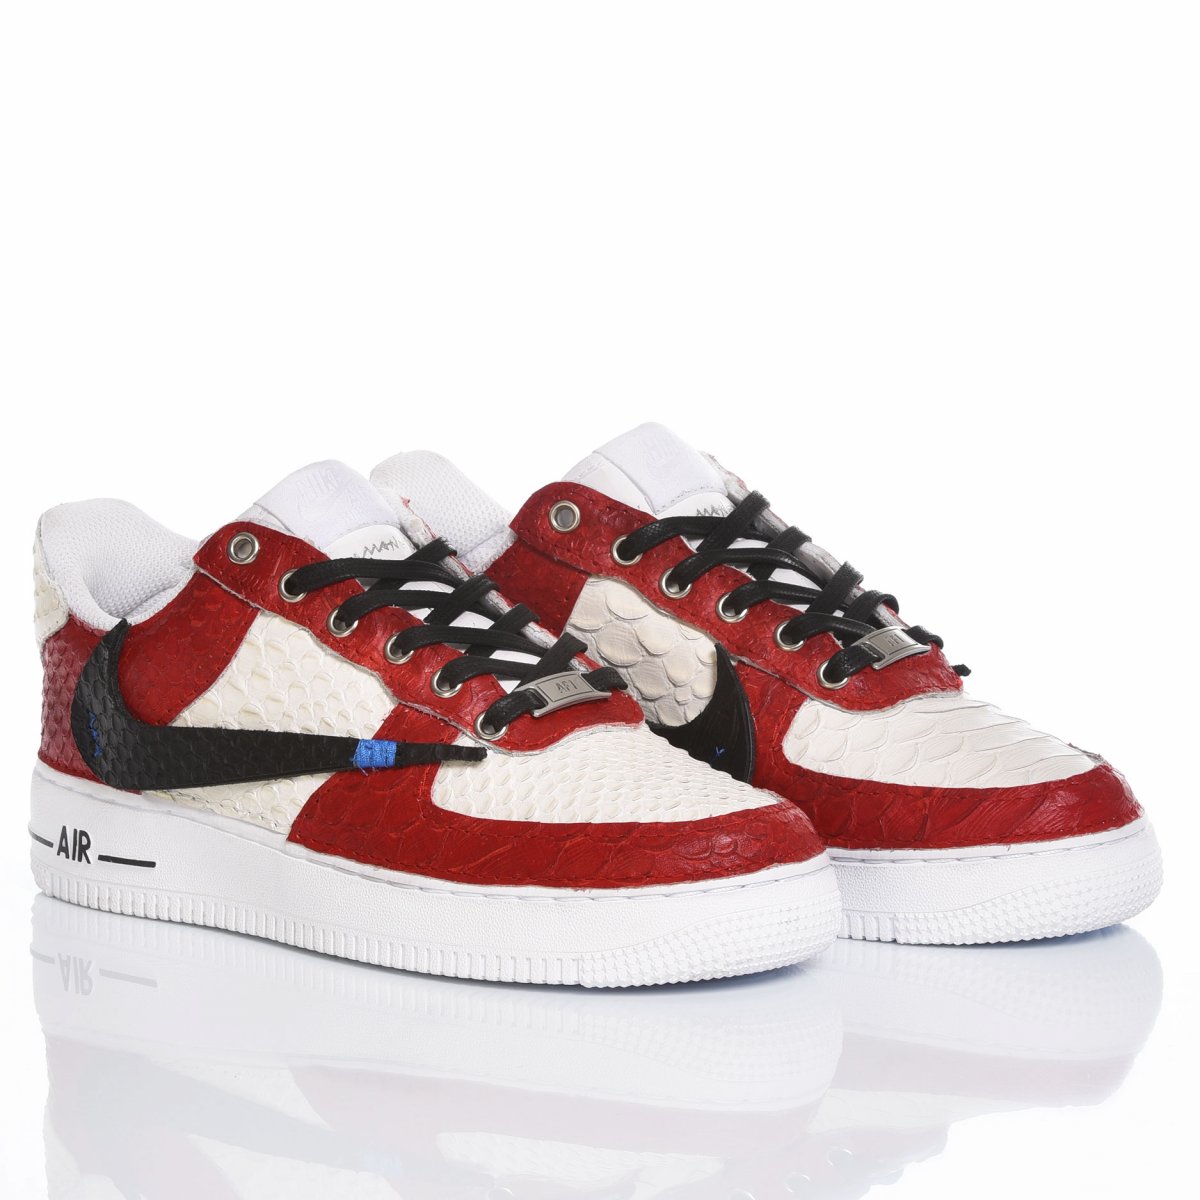 Nike Air Force 1 Club Swoosh Air Force 1 Animalier, Special